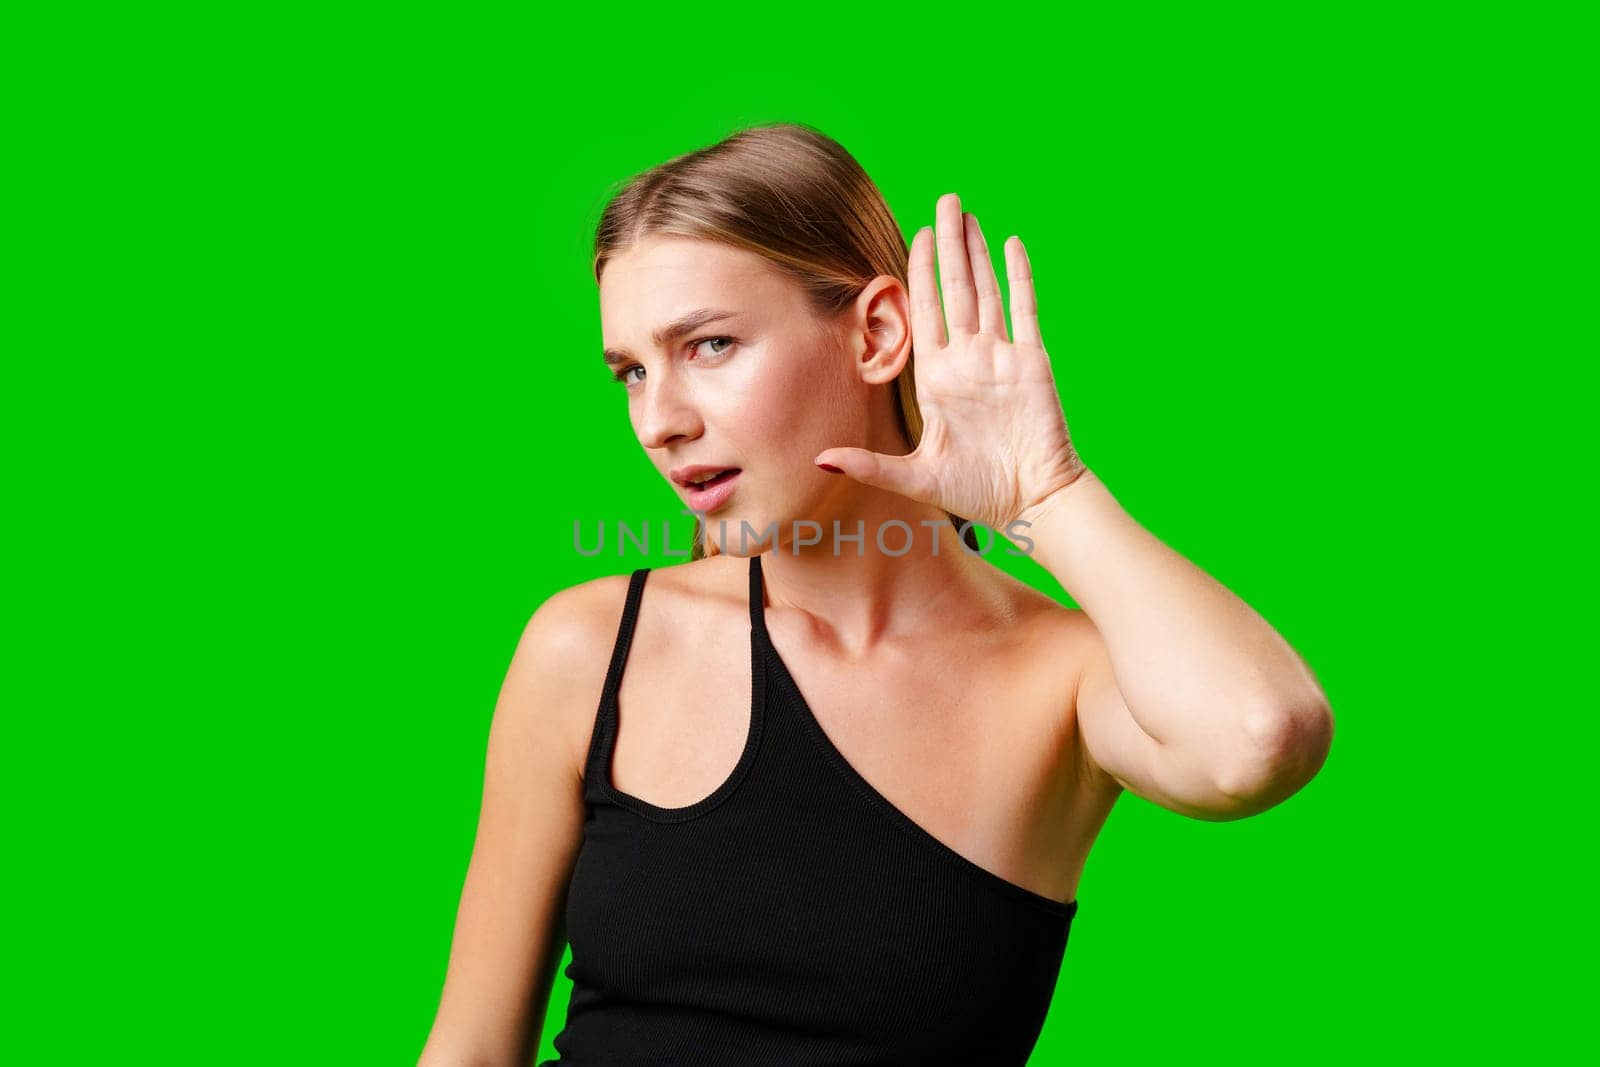 Young Woman in Black Top Holding Hand to Ear against green background